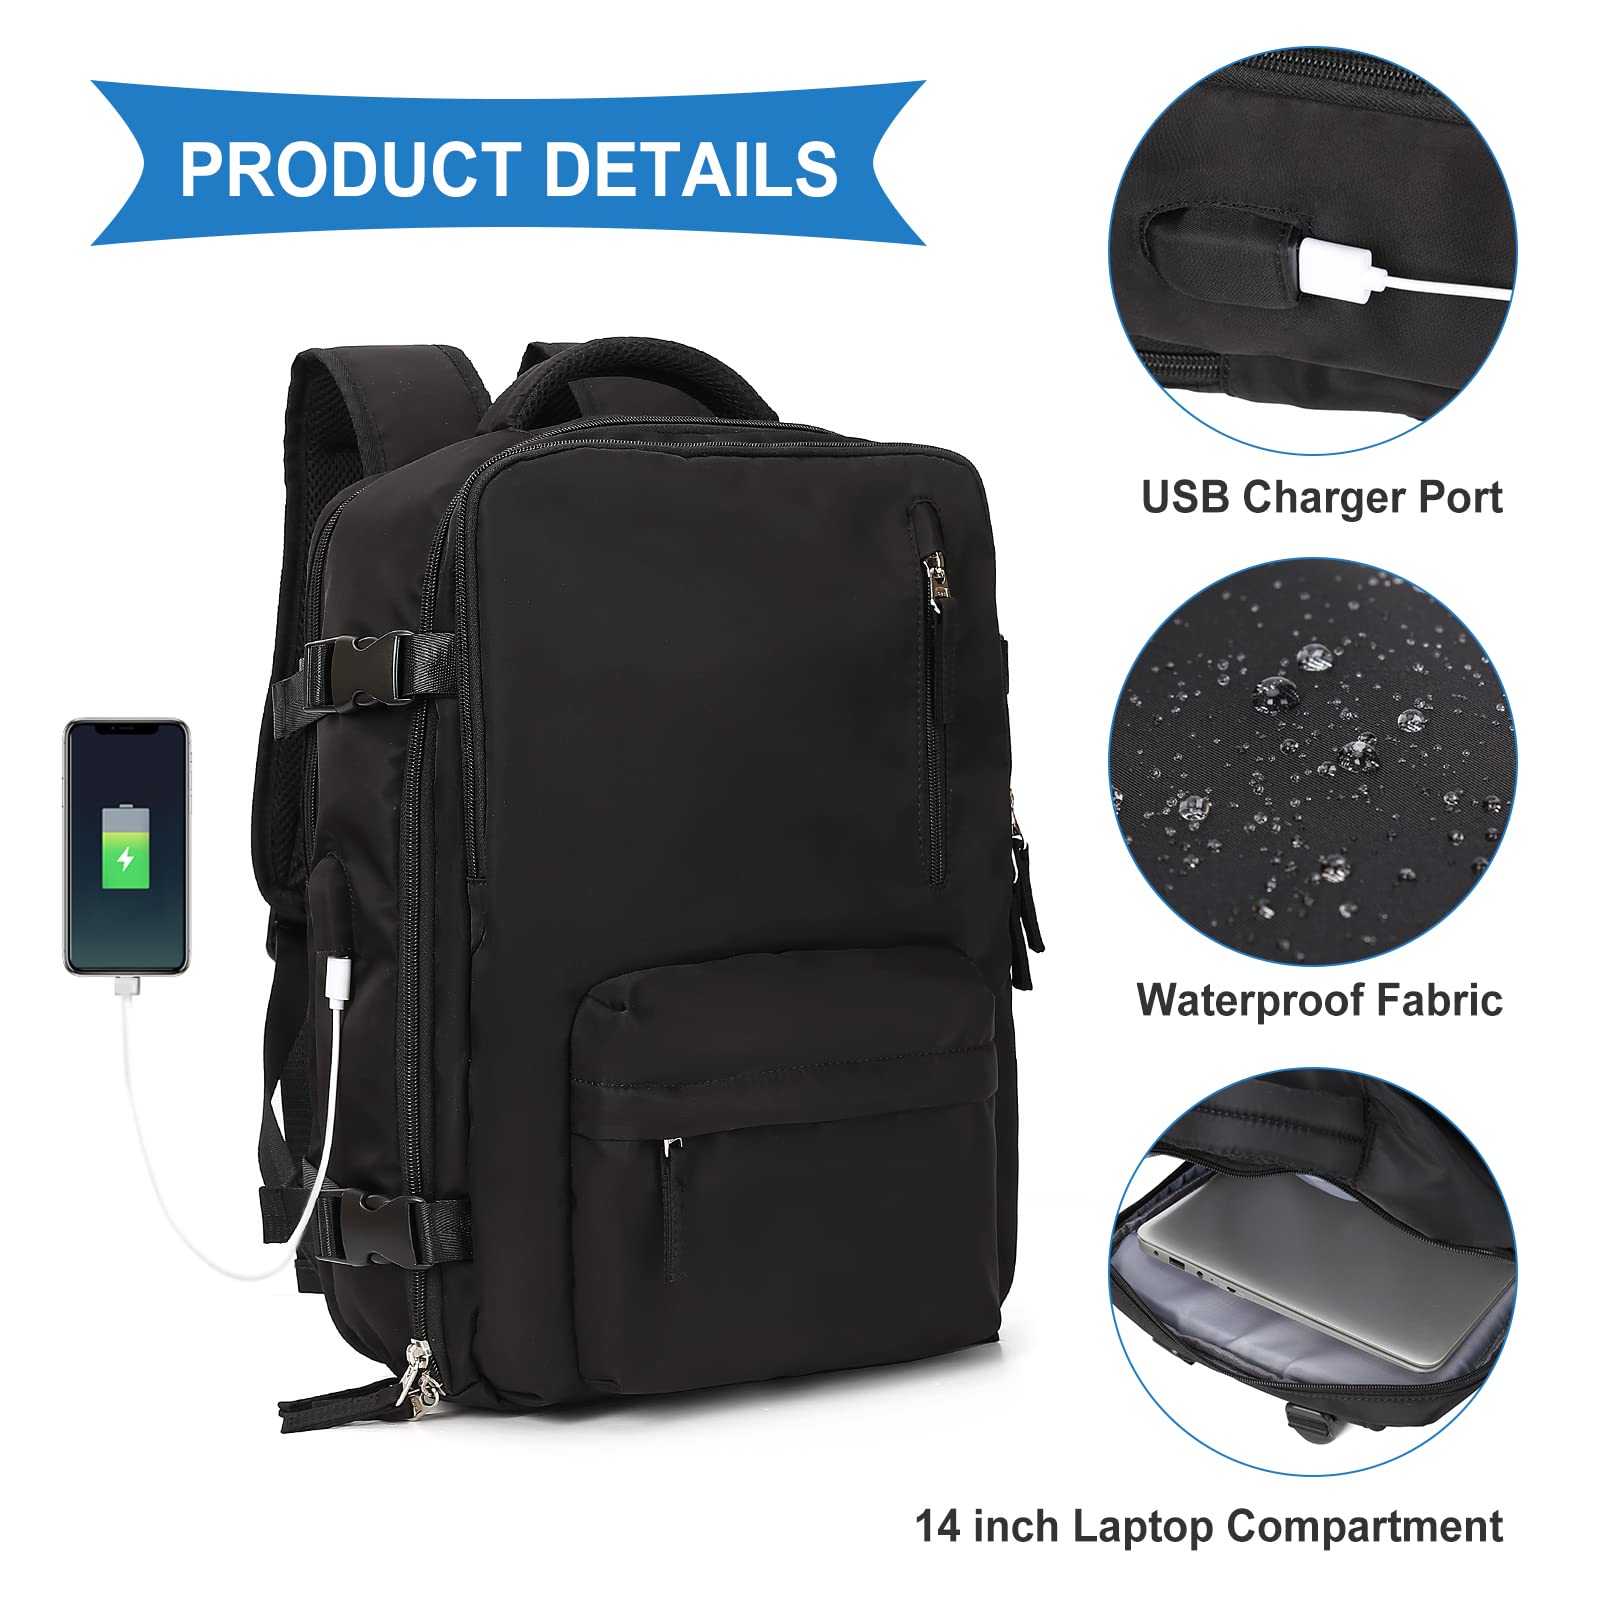 Large Travel Backpack Women, Carry On Backpack,Hiking Backpack Waterproof Outdoor Sports Rucksack Casual Daypack Fit 14 Inch Laptop with USB Charging Port Shoes Compartment, Black